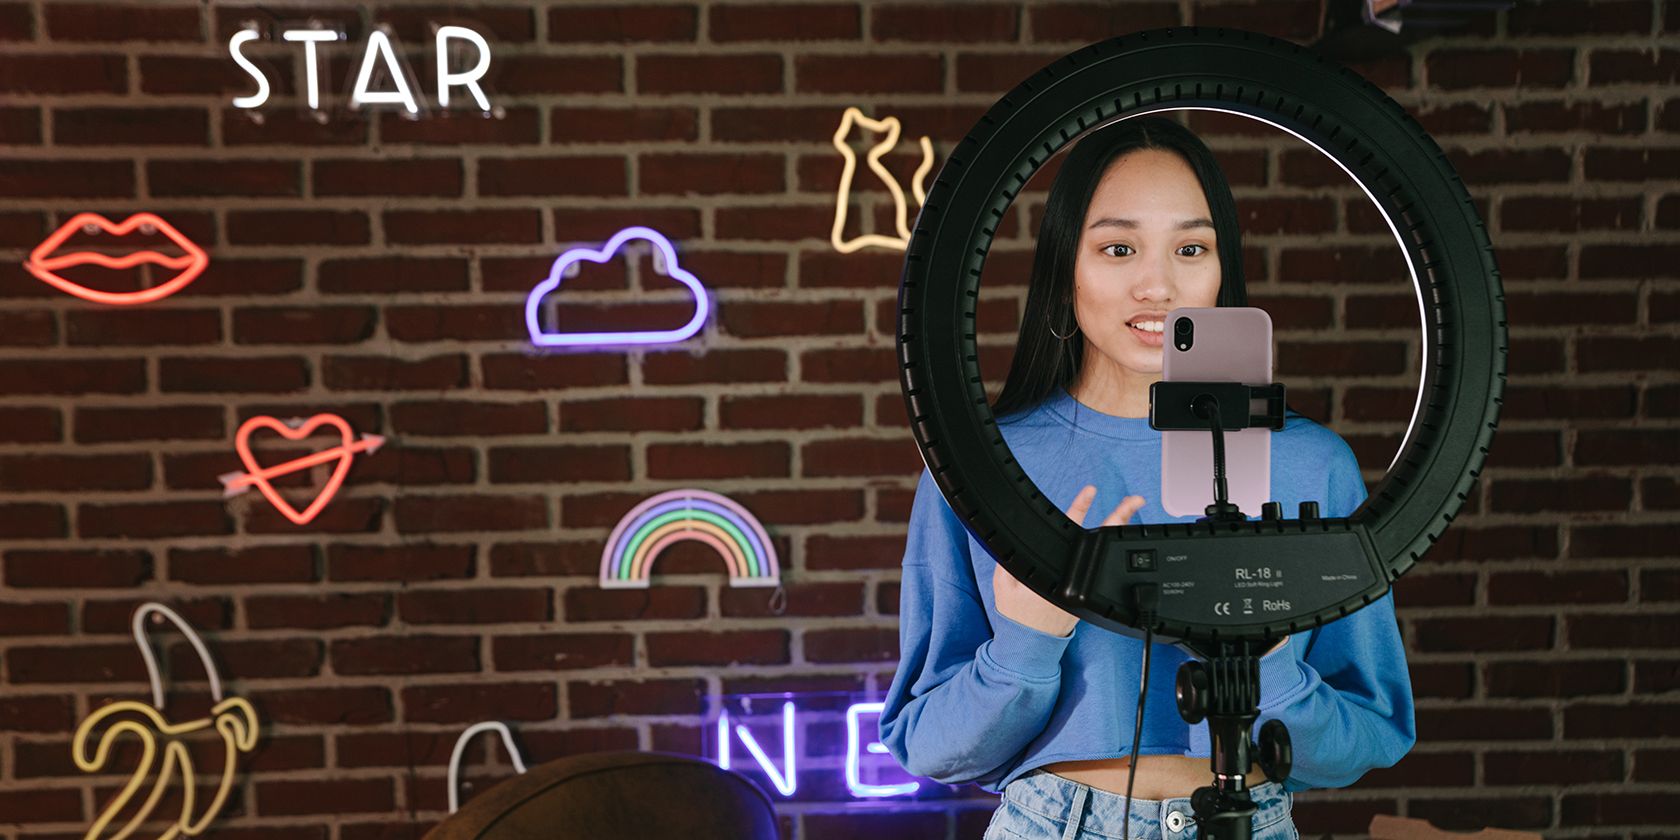 Young woman films video in front of brick wall using phone and ring light